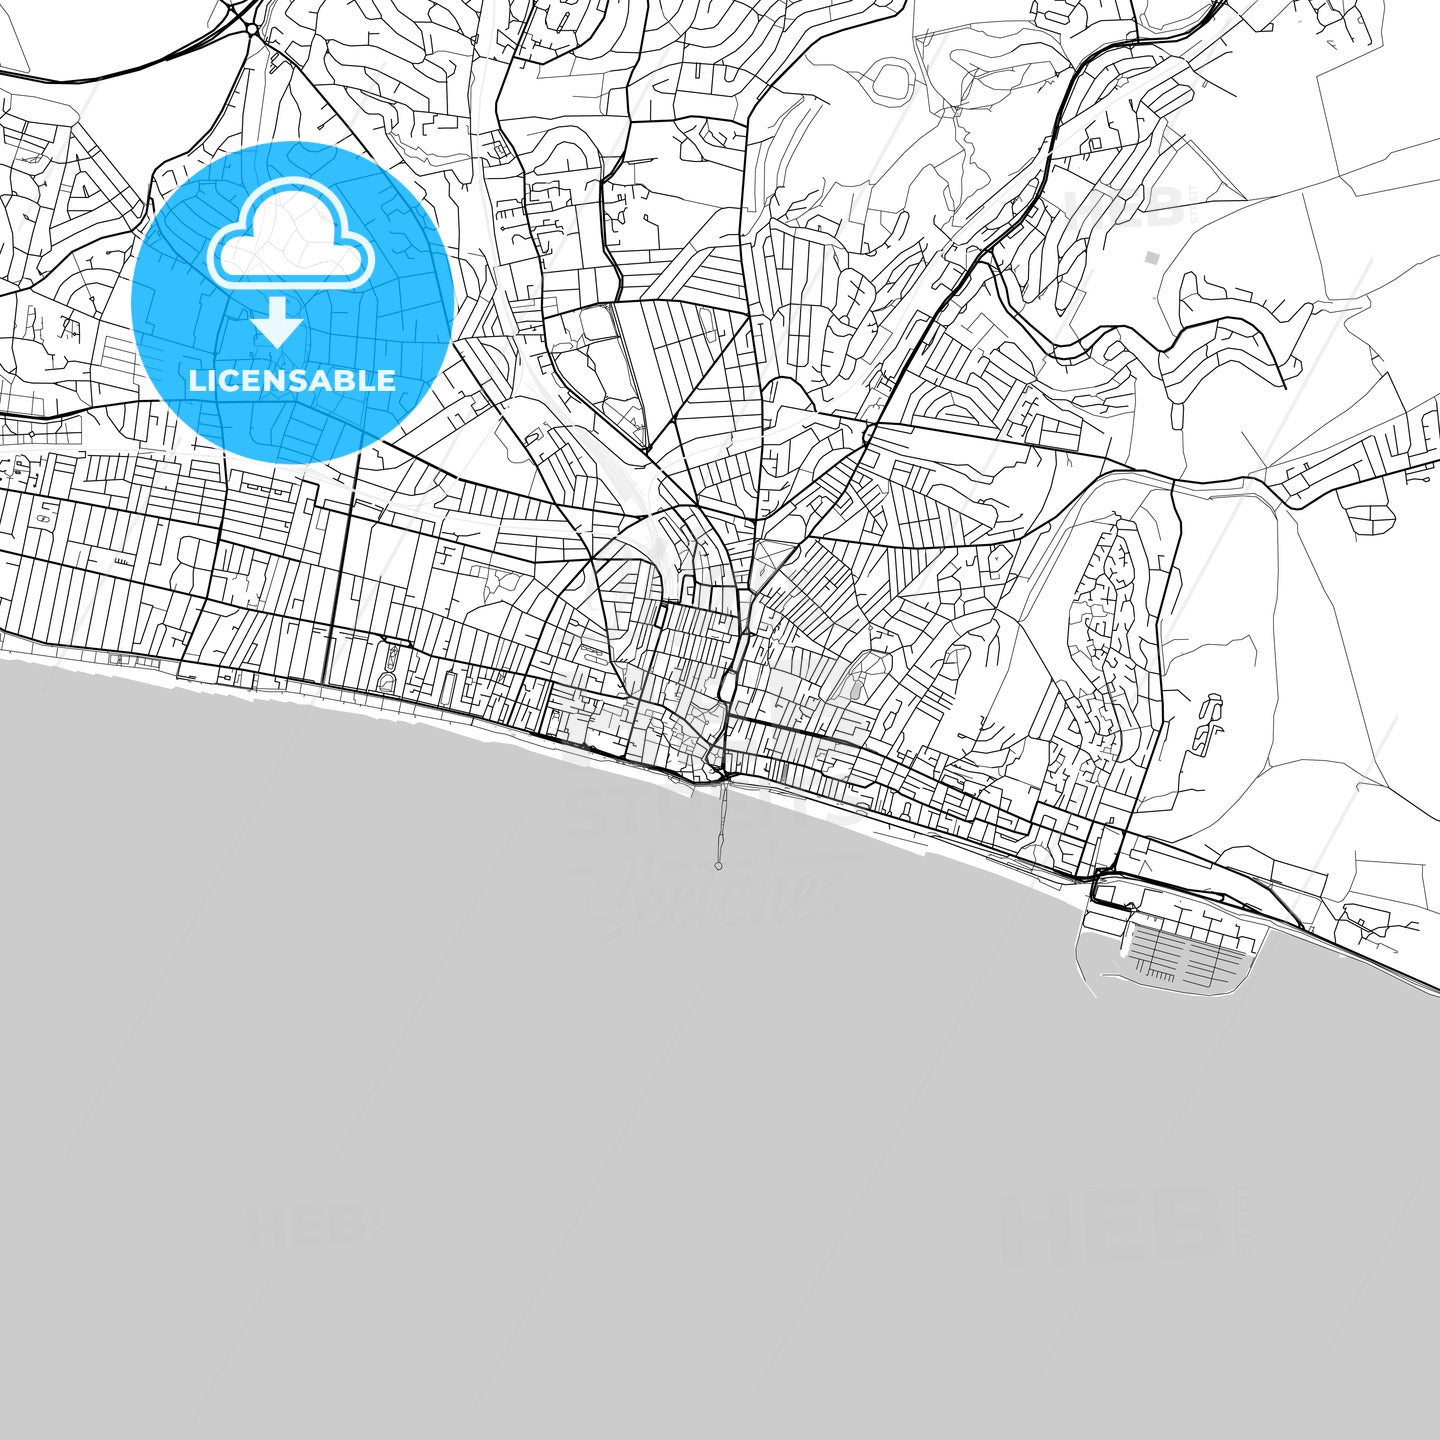 Brighton and Hove, England, UK, Vector Map - Light